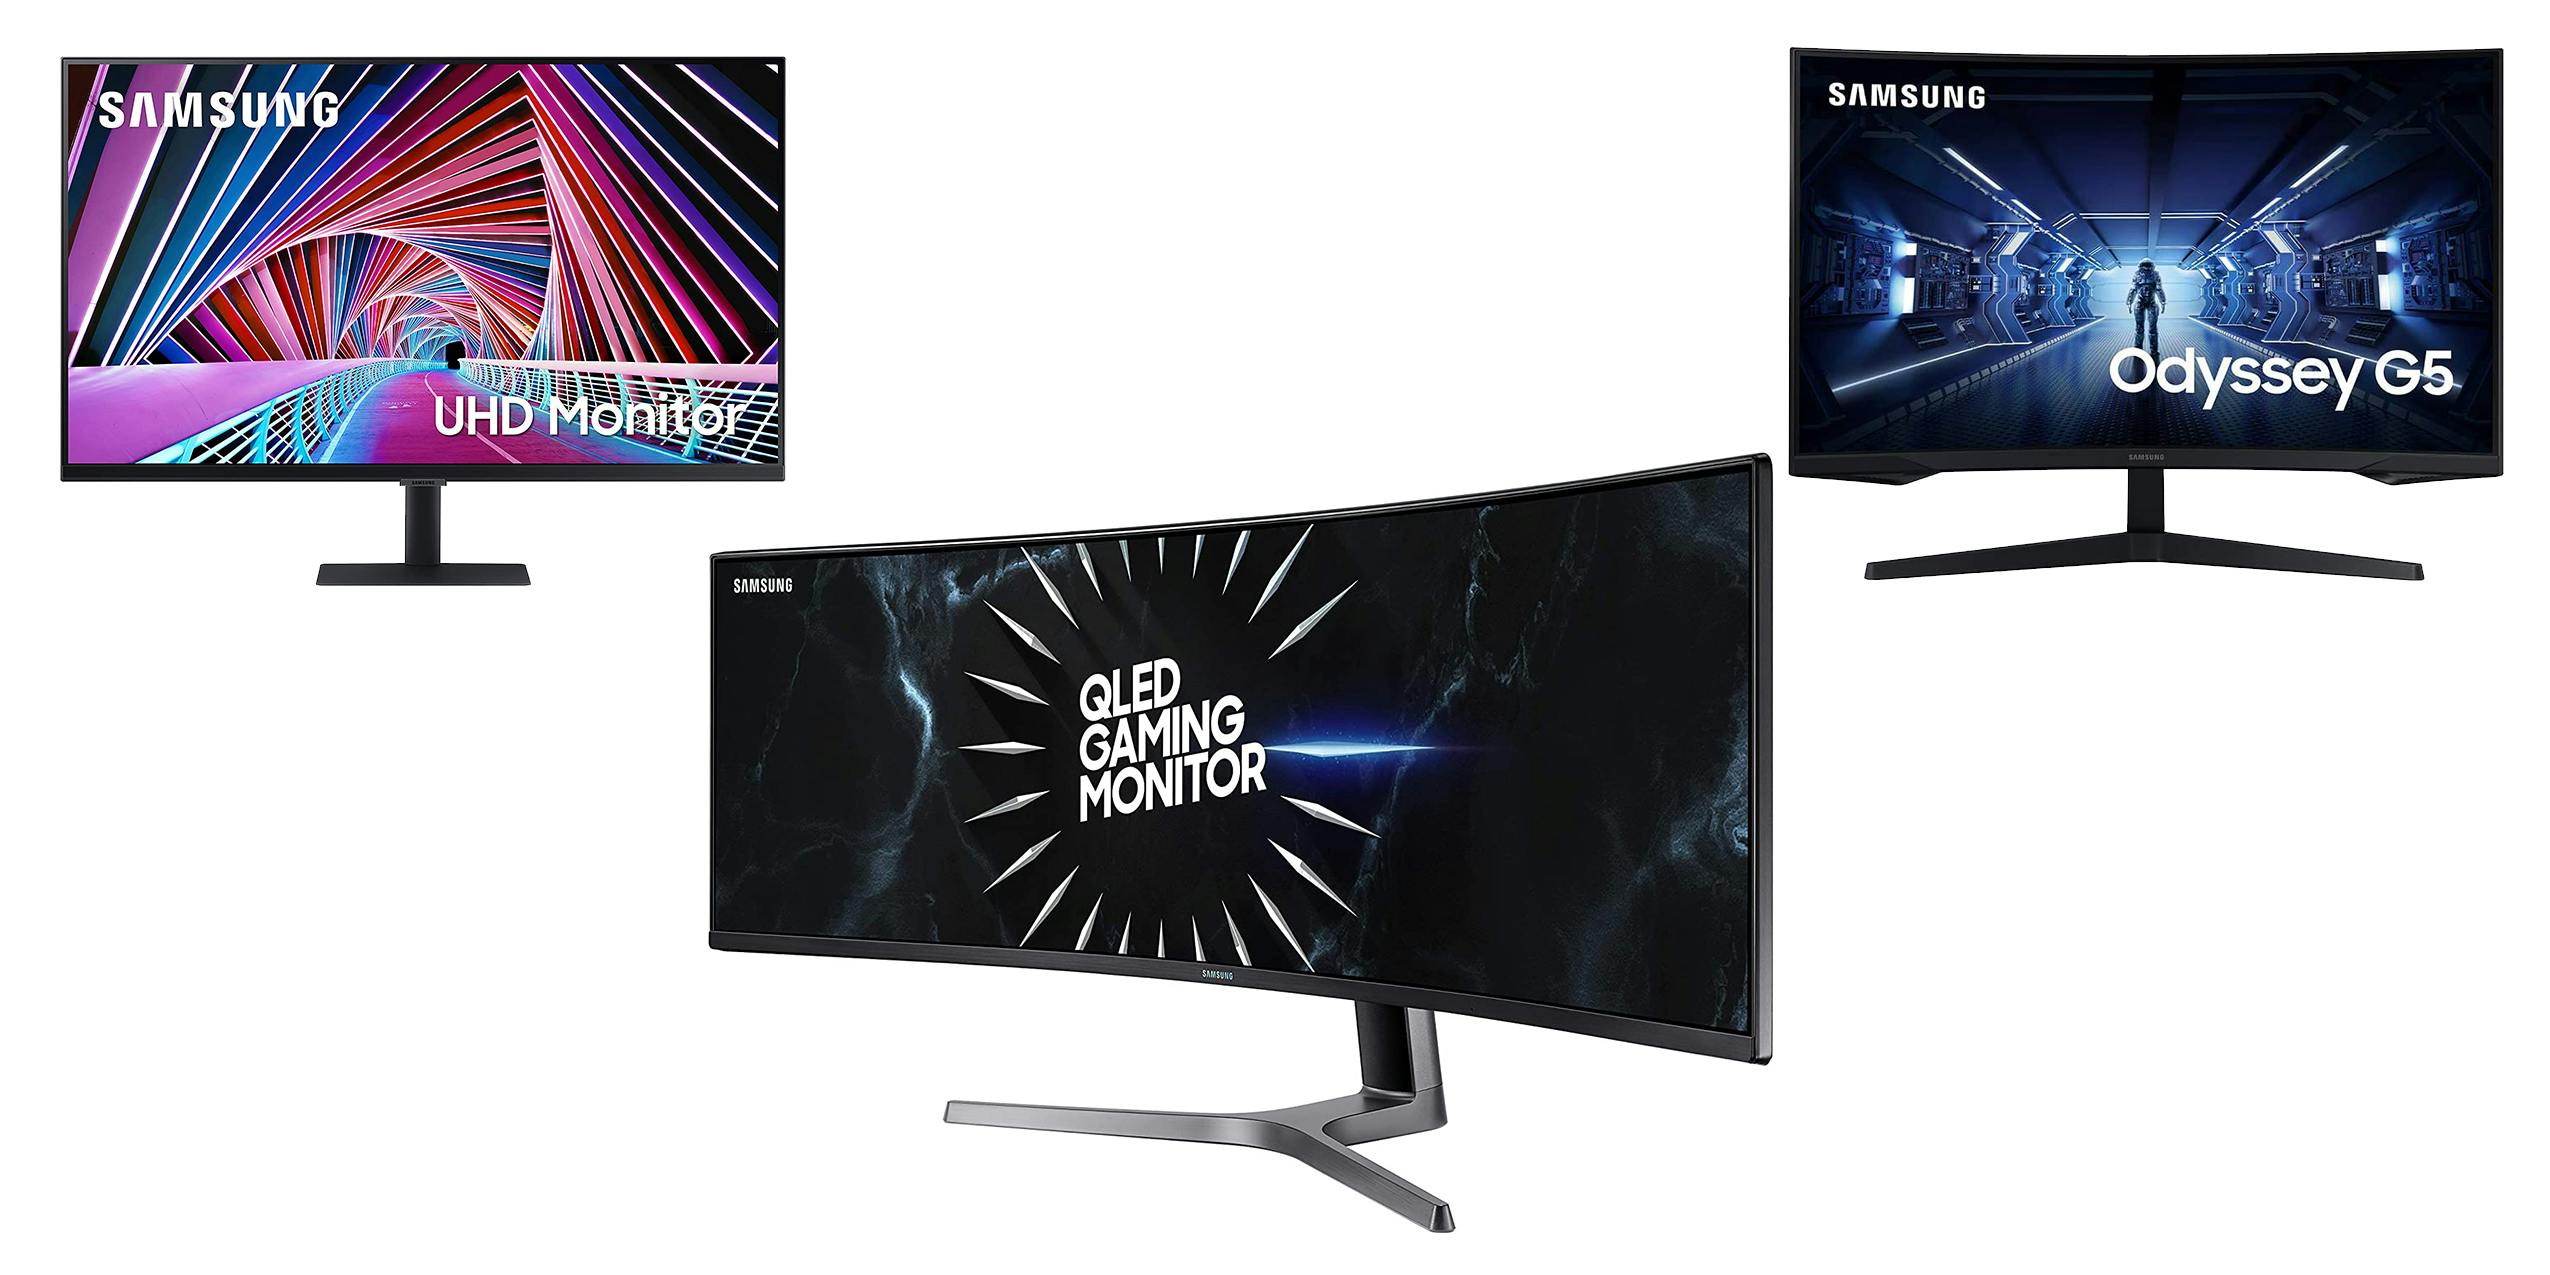 A selection of Samsung gaming monitors including Odyssey G5 and QLED models.